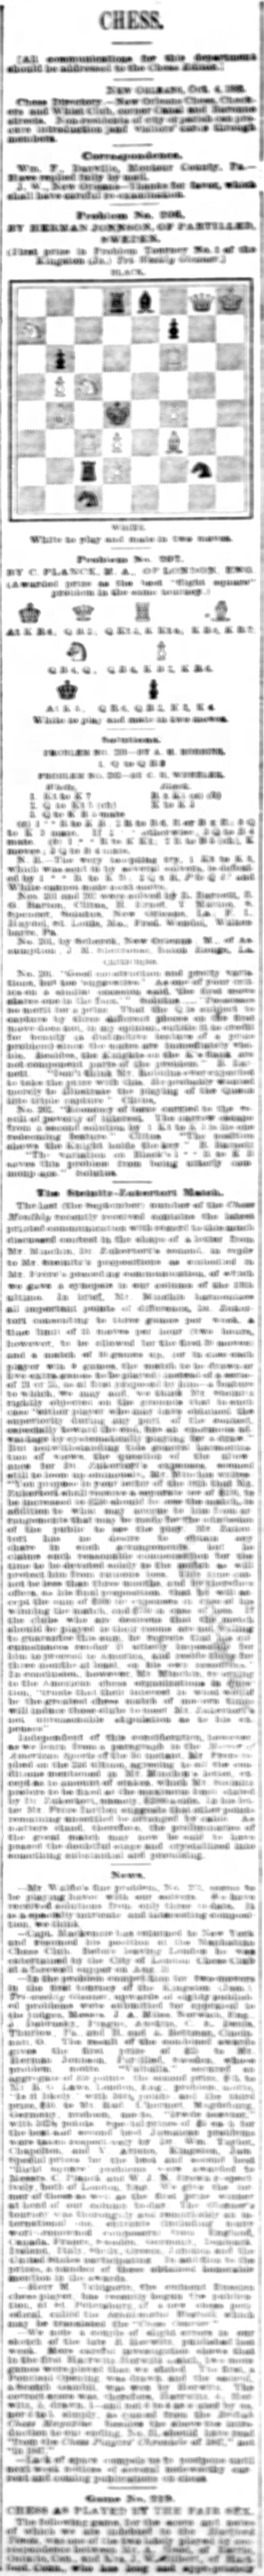 1885.10.04-01 New Orleans Times-Democrat.png